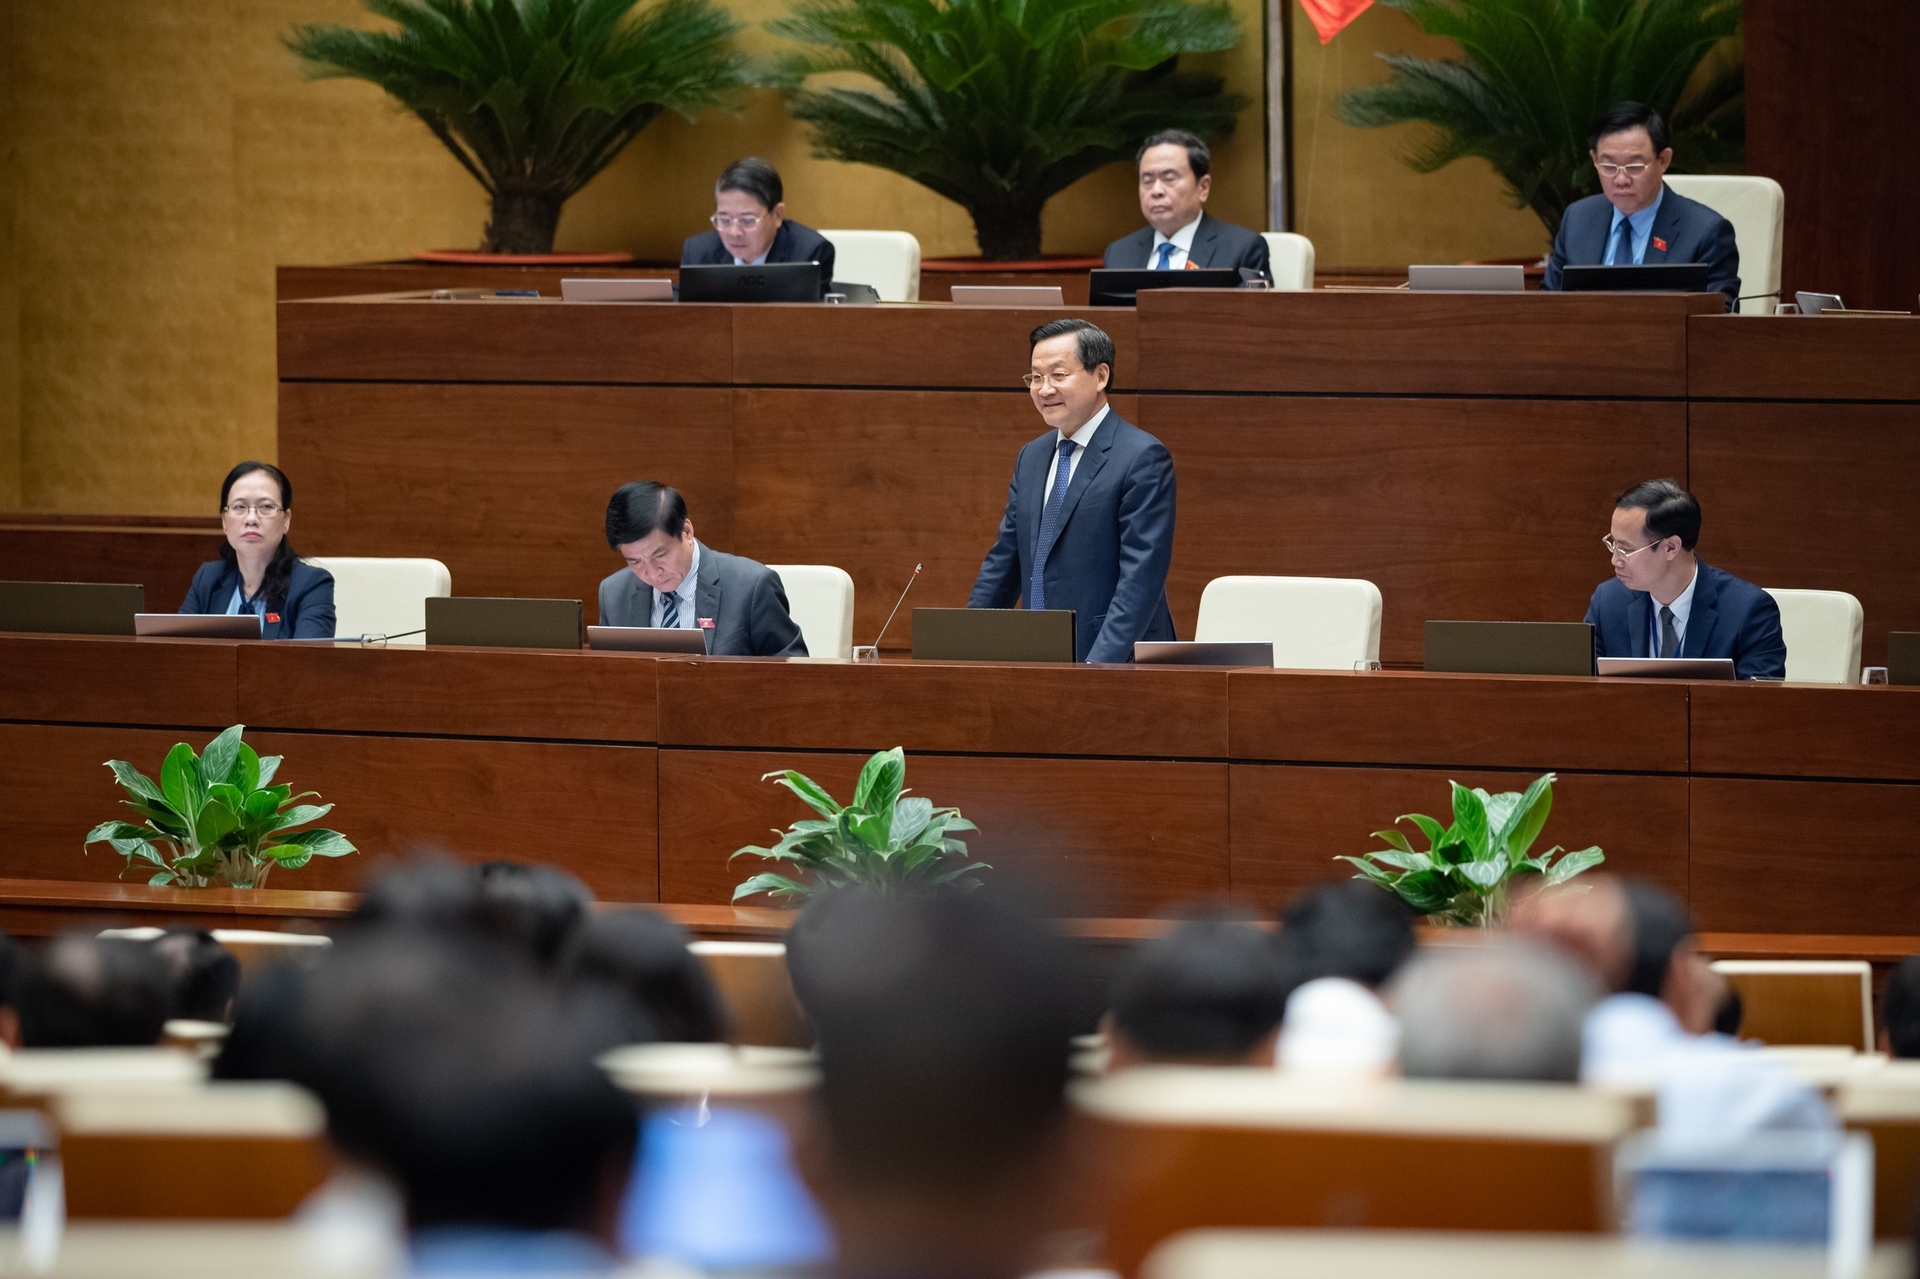 The Deputy Prime Minister emphasized that the Government is determined to stabilize the macro-economy, control inflation, and promote growth.